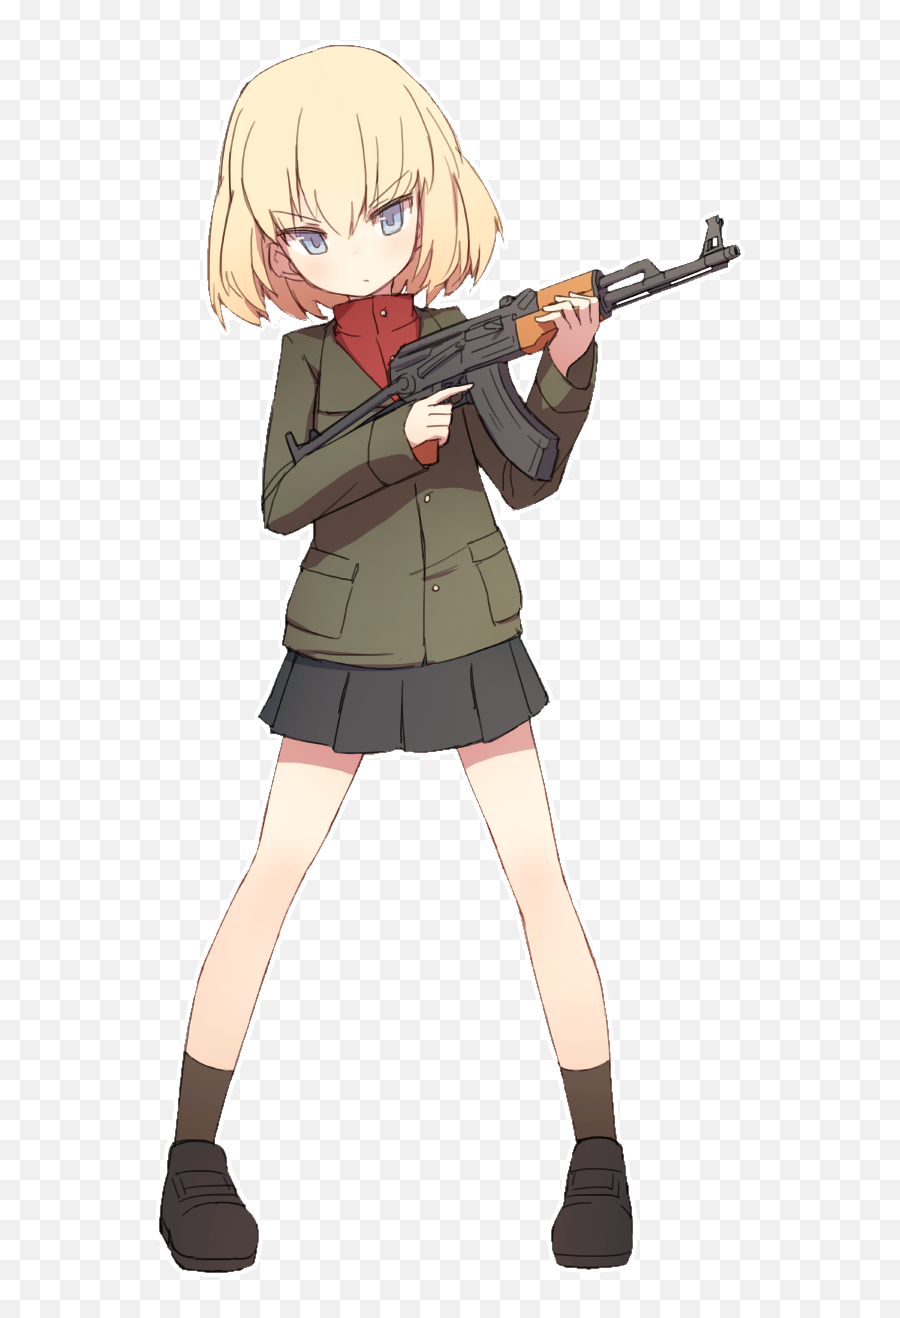 Download 1520545361499 - Anime Girl With Ak 47 Full Size Anime Girl With Gun Png,Ak47 Png